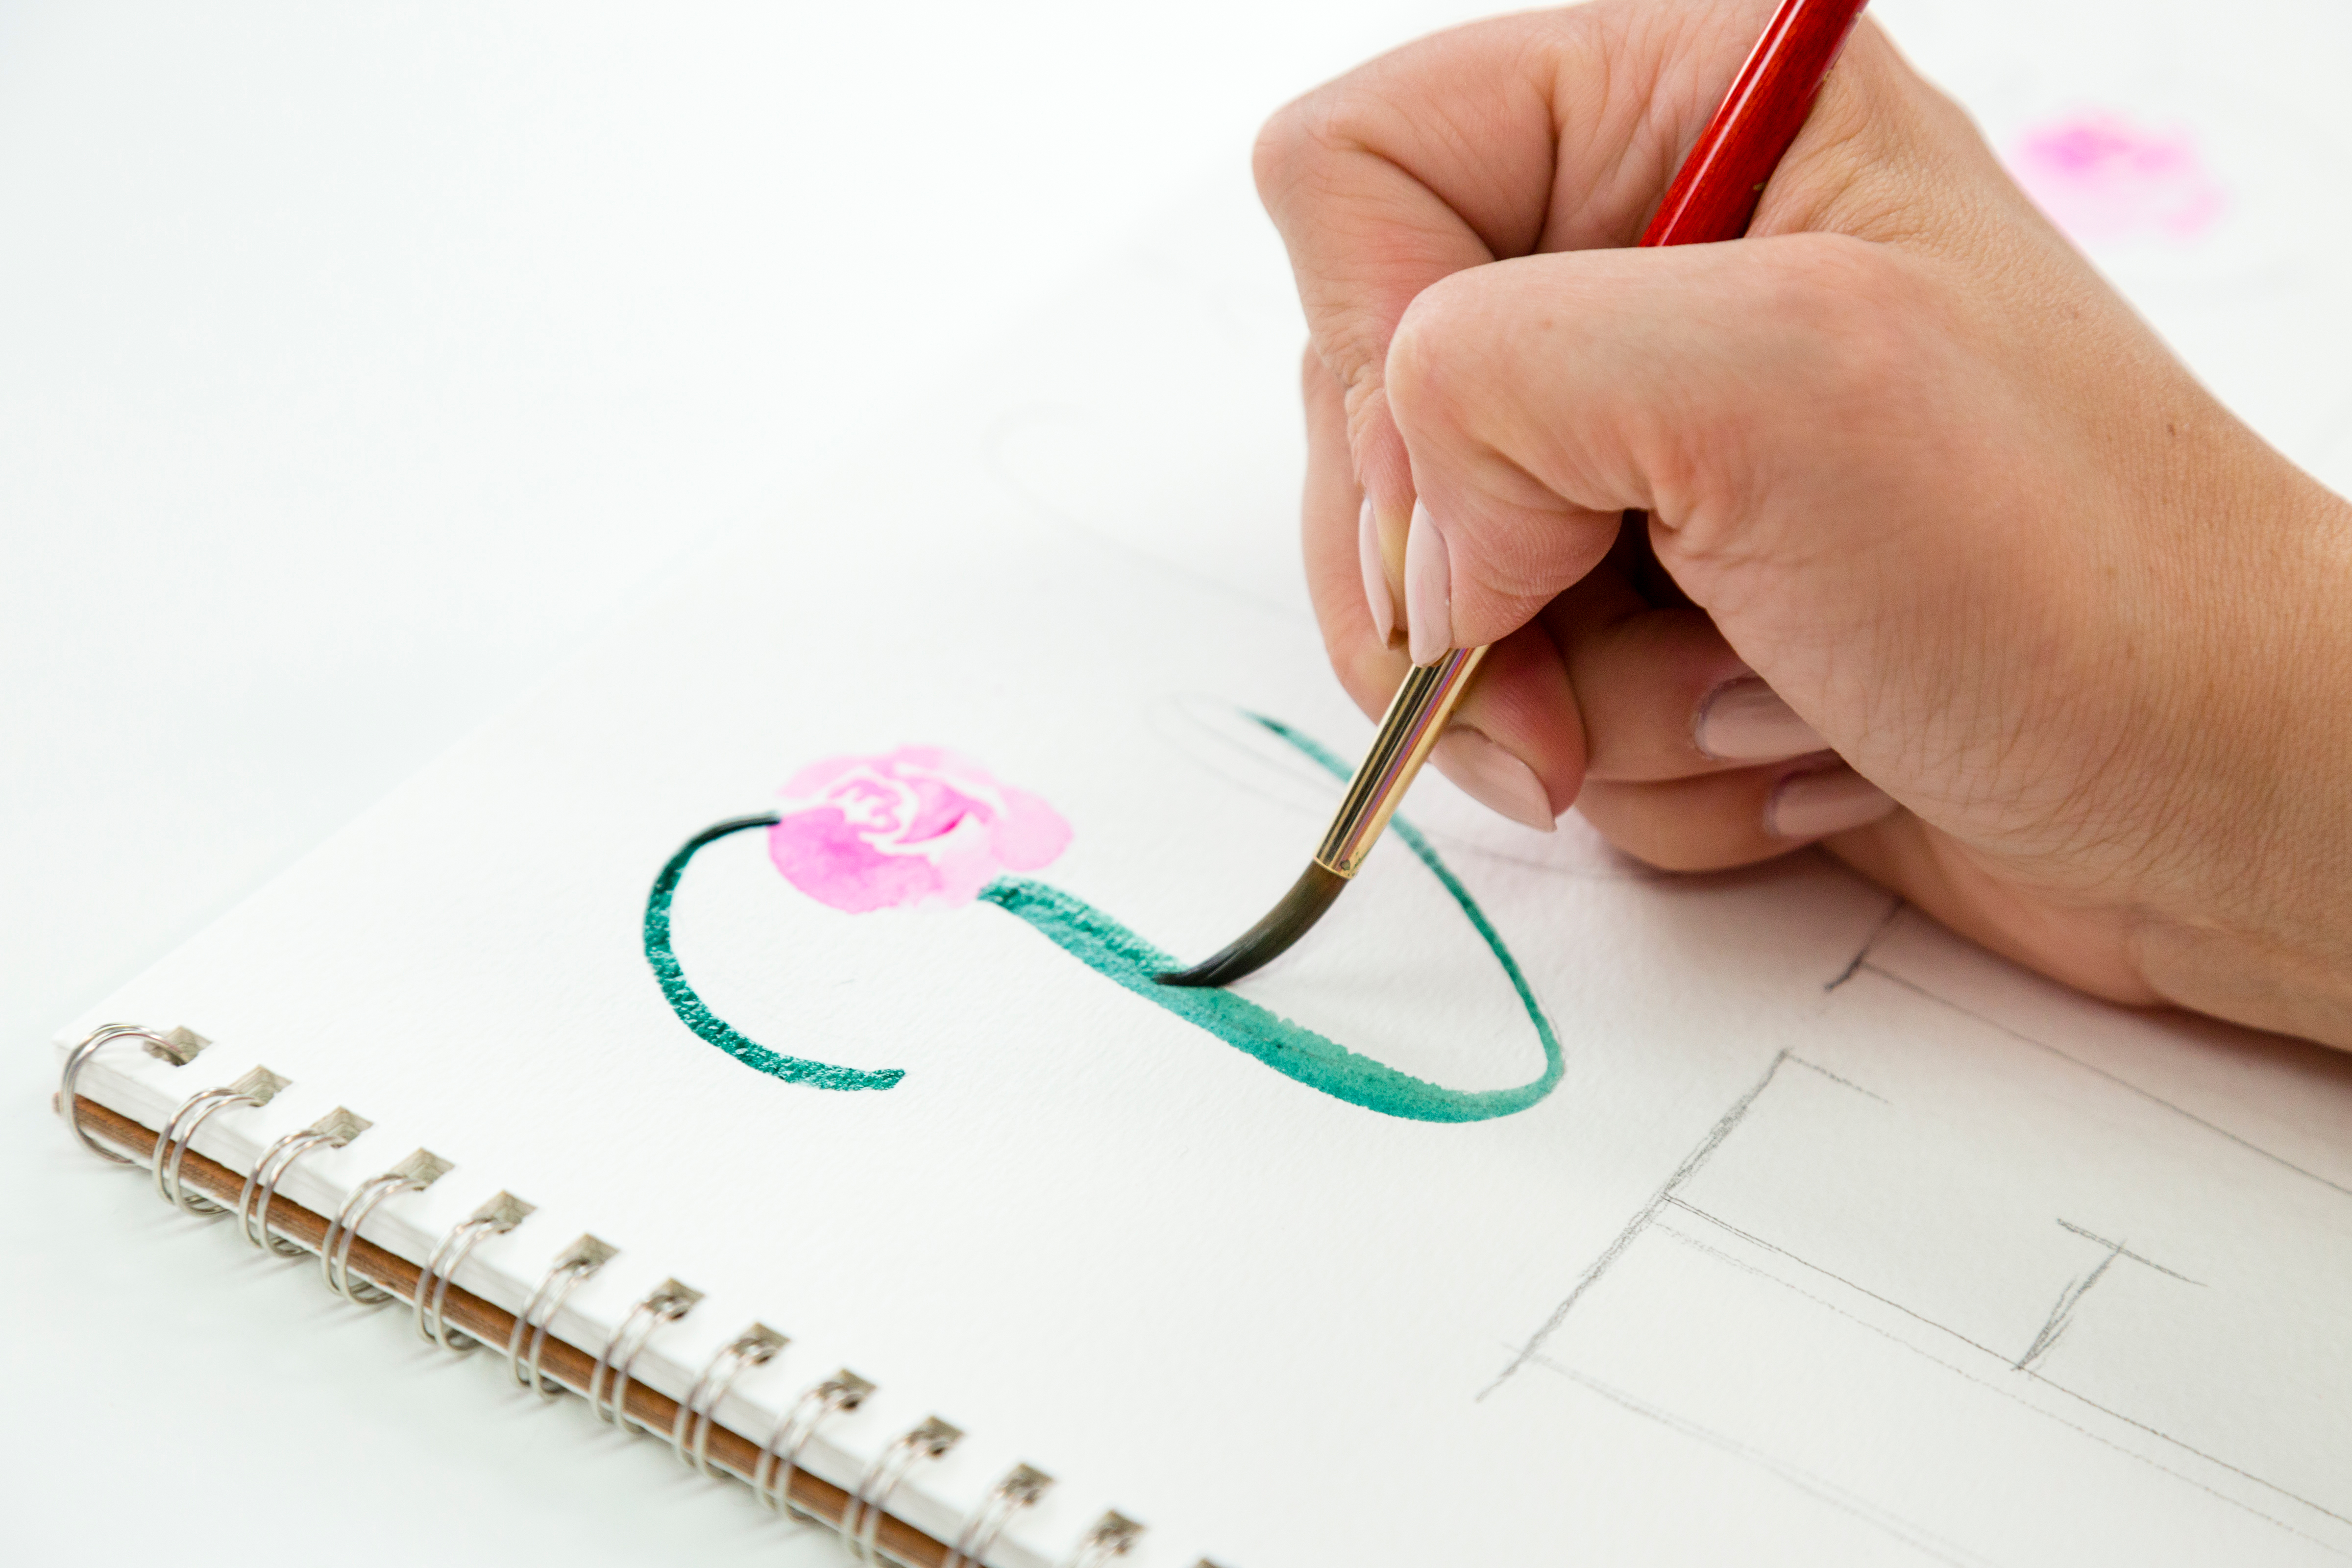 Join Valerie McKeehan for her Illustrated Watercolor Lettering class offered through Brit + Co